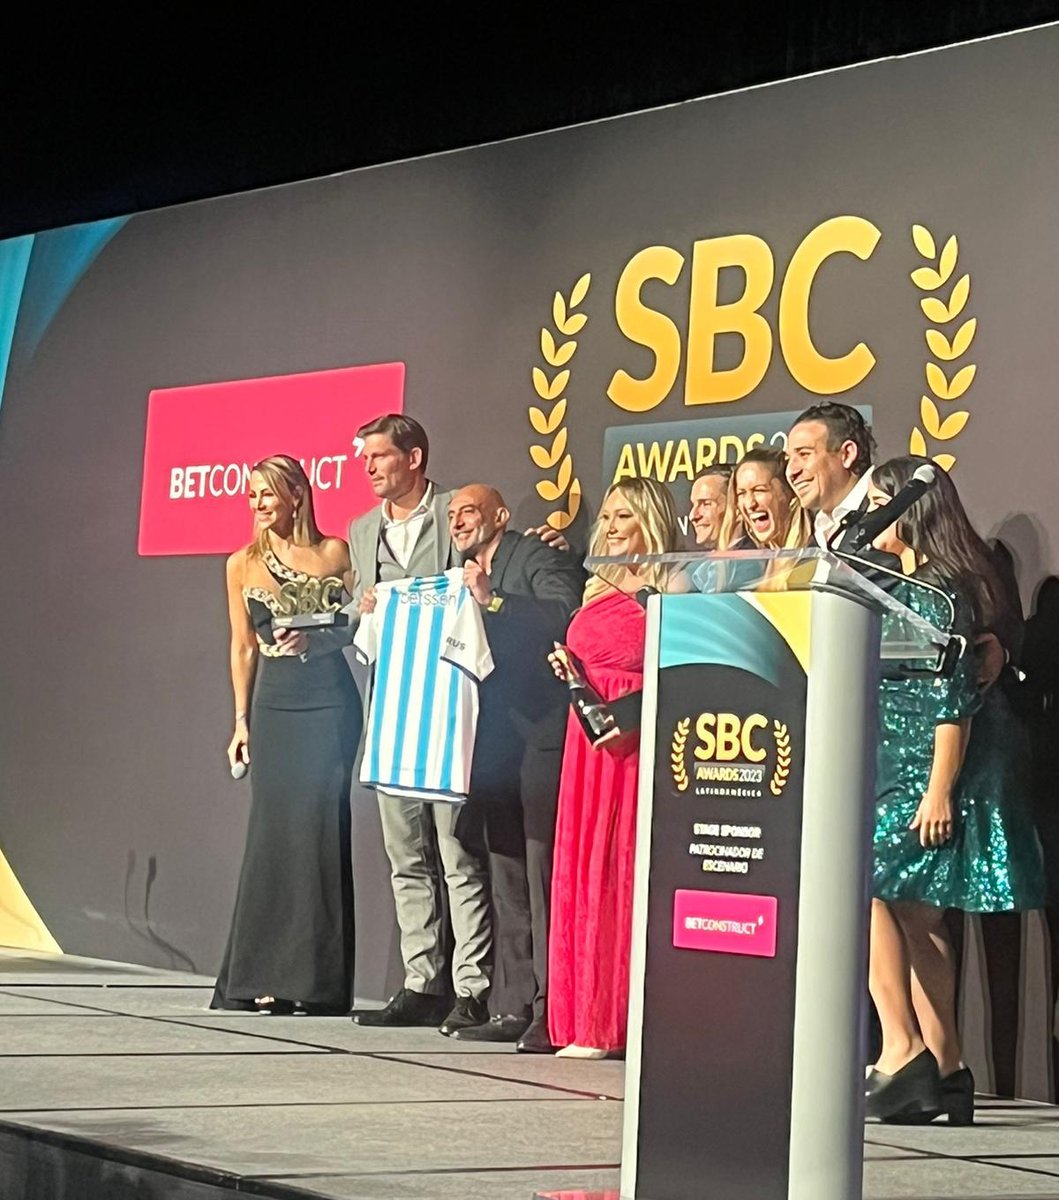 Proud to announce that we won 3 awards at SBC Awards Latinoamerica!🏆

Leader of the Year - Andrea Rossi
Marketing Campaign of the Year - 2022 Women's Copa América
Casino Operator of the Year

Our LatAm teams have made us incredibly proud! 🙌 #SBCAwardsLatinoamerica #BetssonGroup